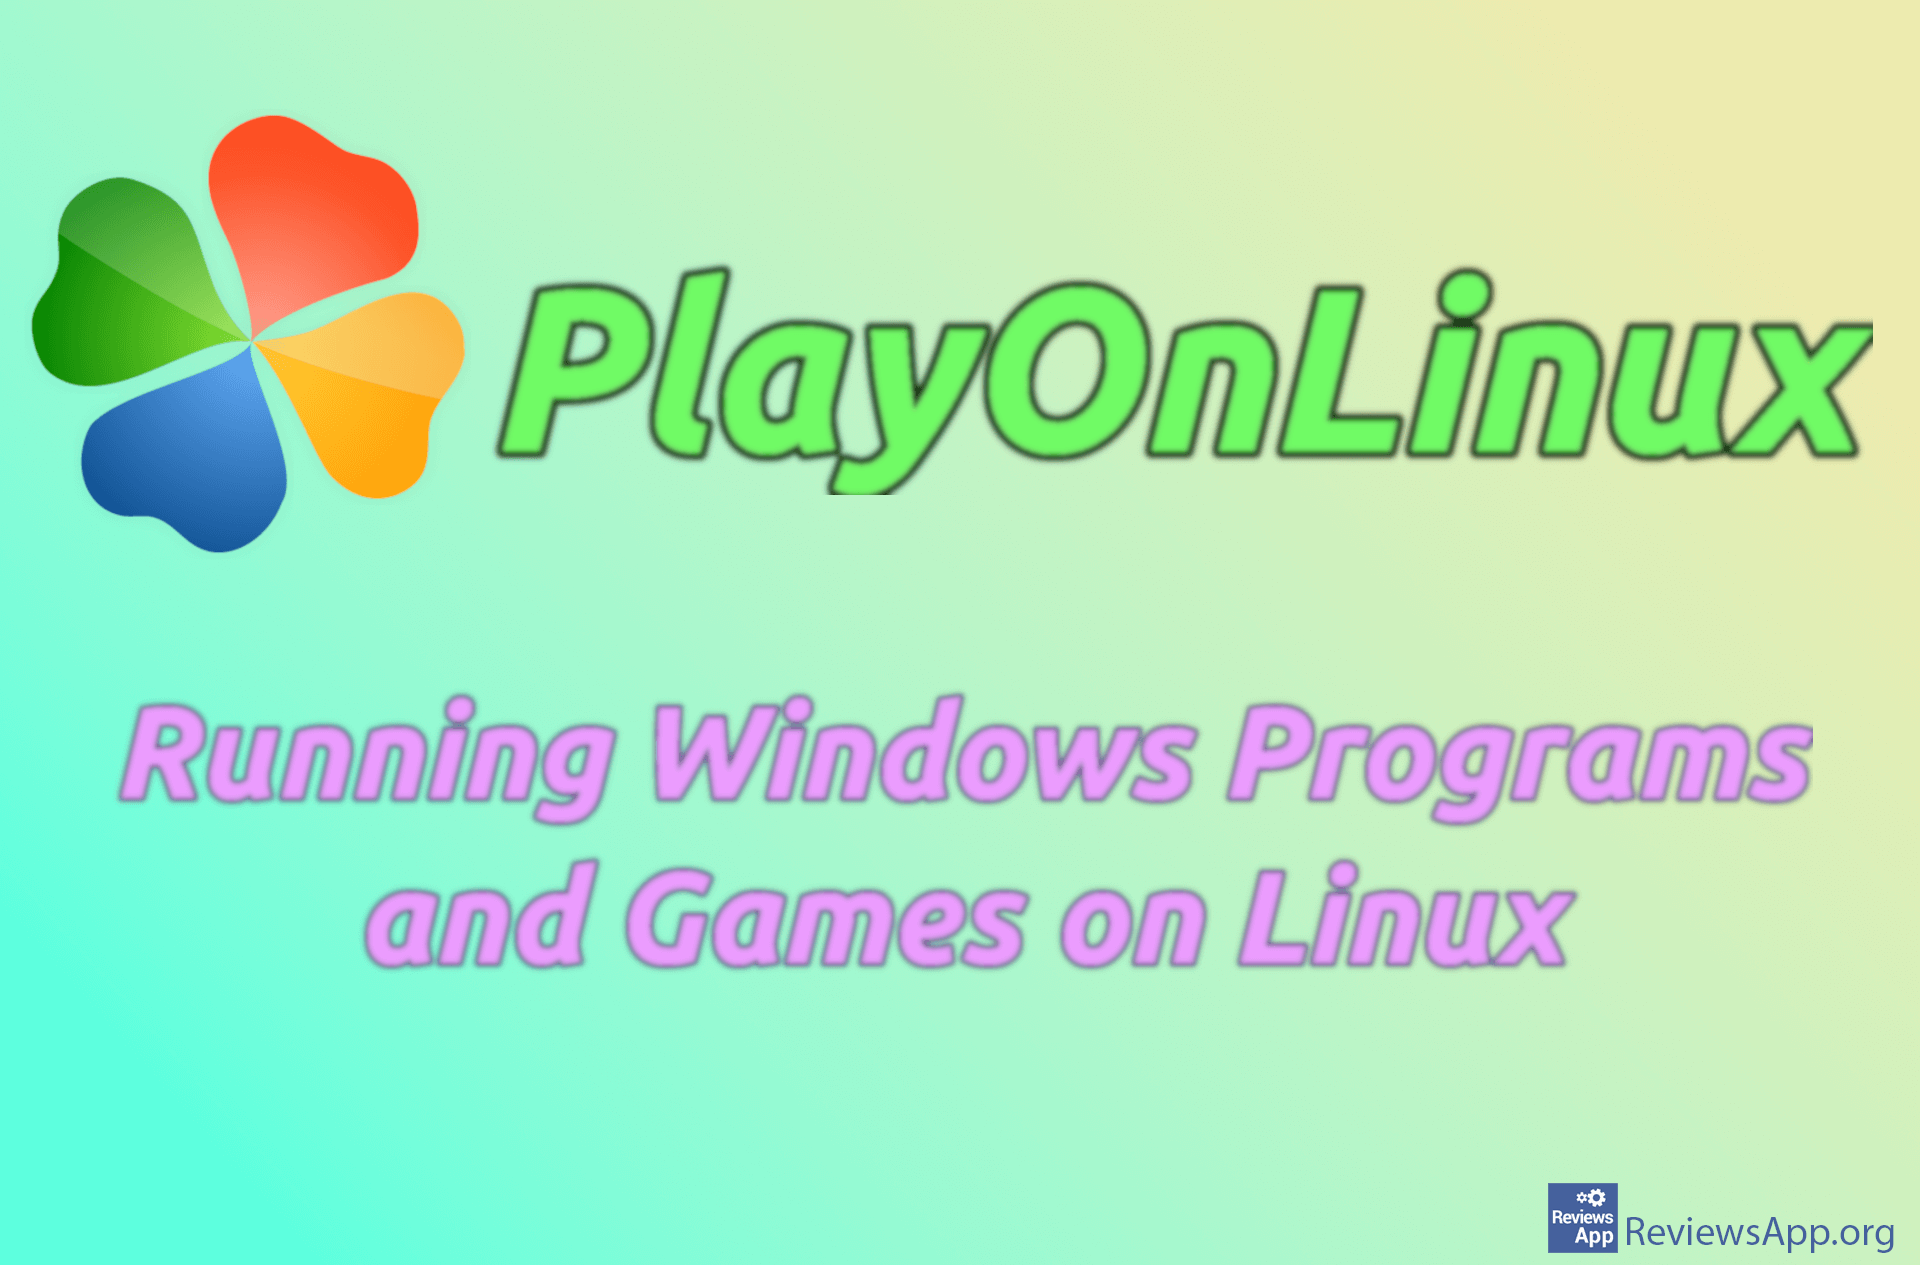 PlayOnLinux – Running Windows Programs and Games on Linux